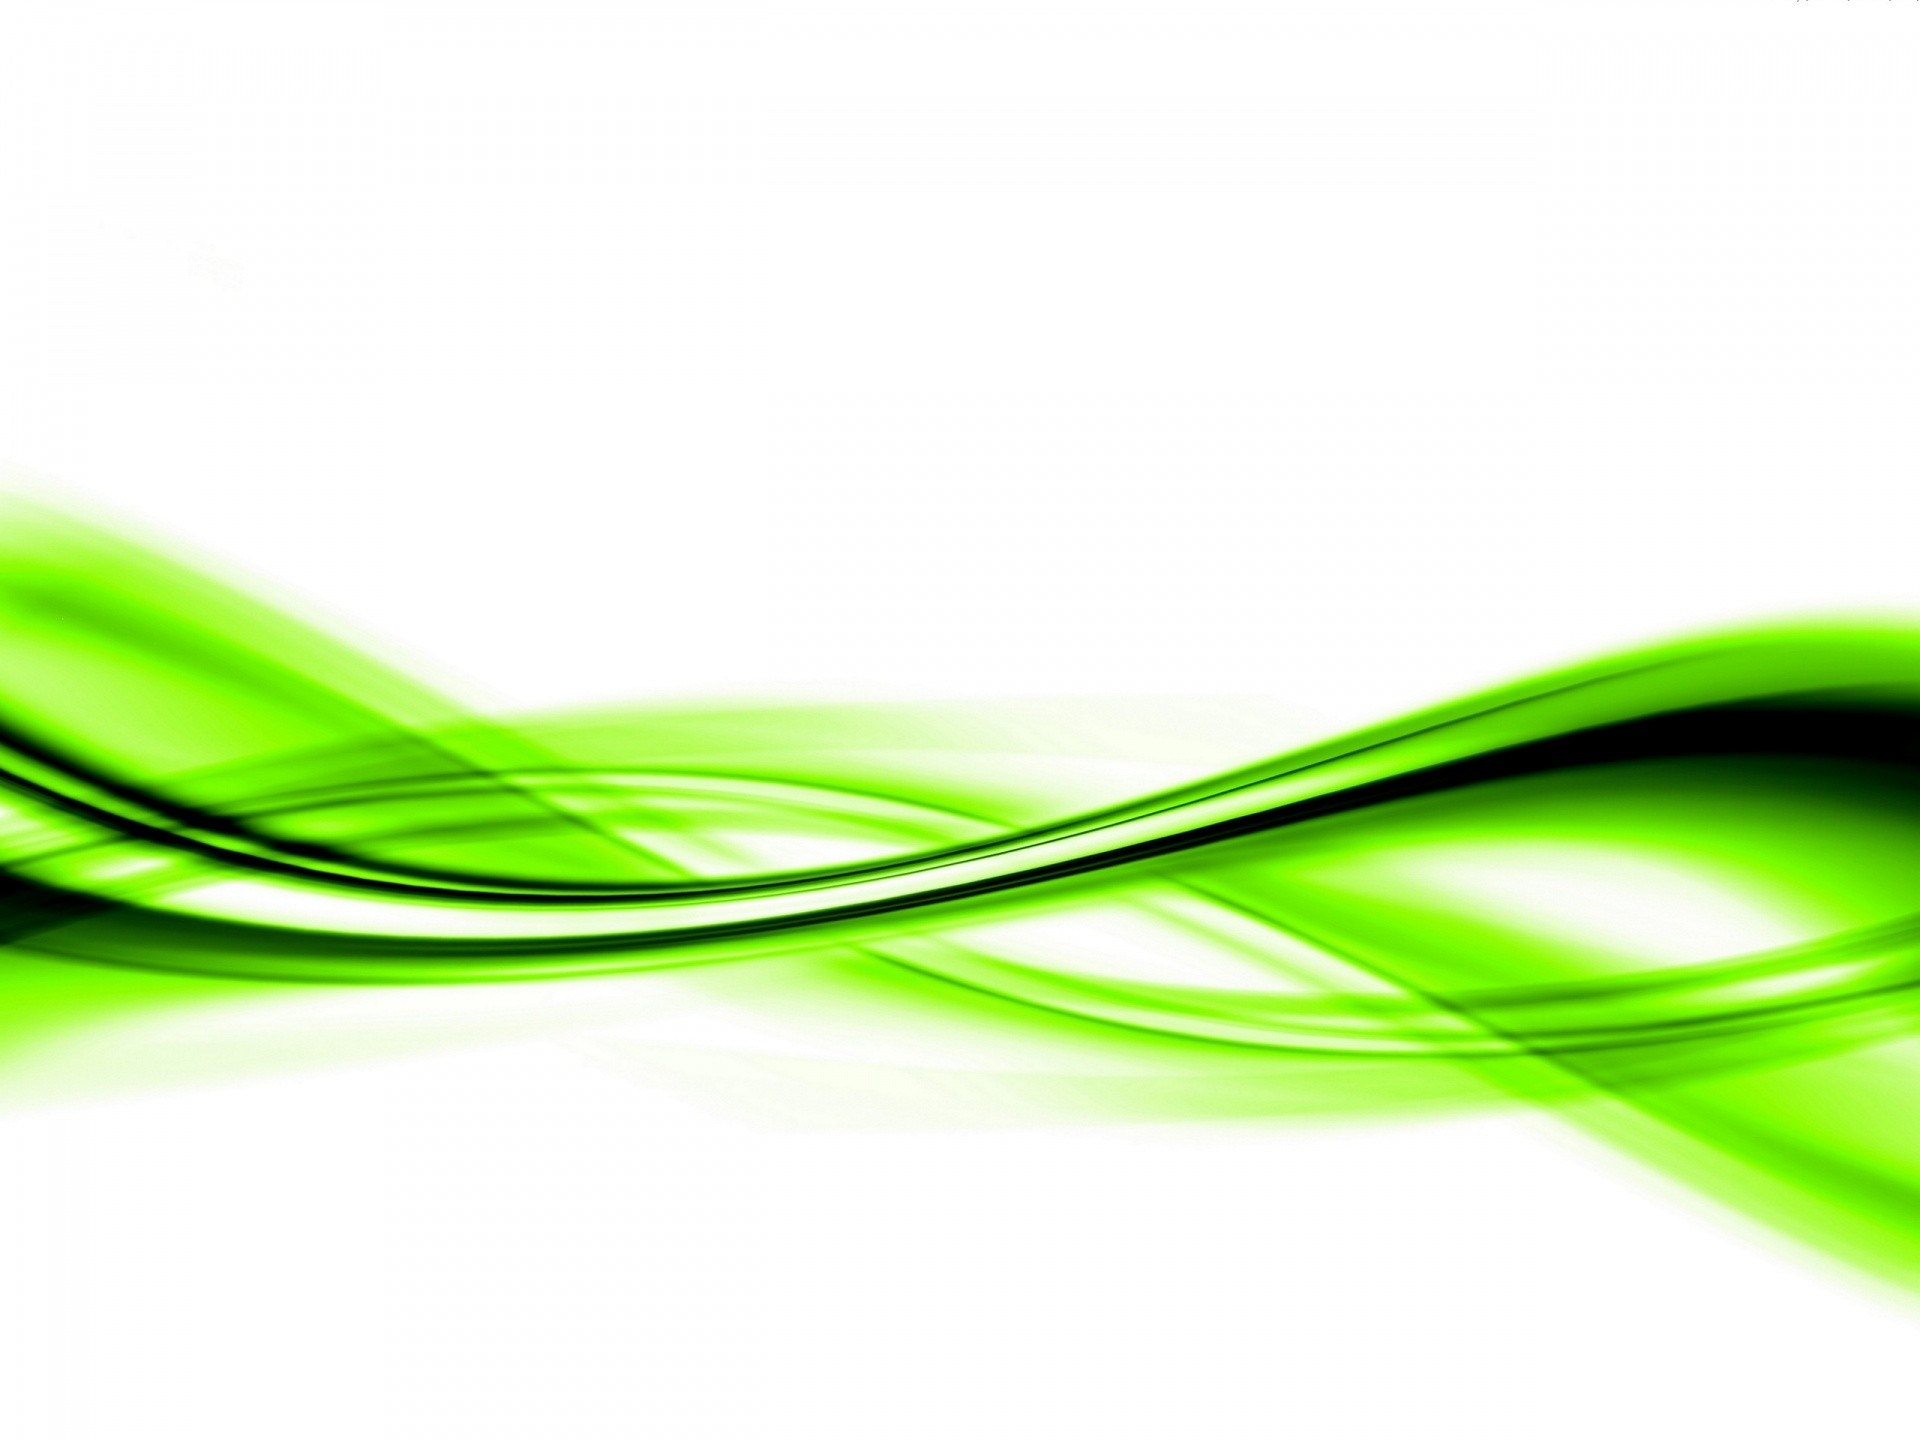  Wallpaper 1920x1440 Green Abstract Colorful Waves Lines White 1920x1440